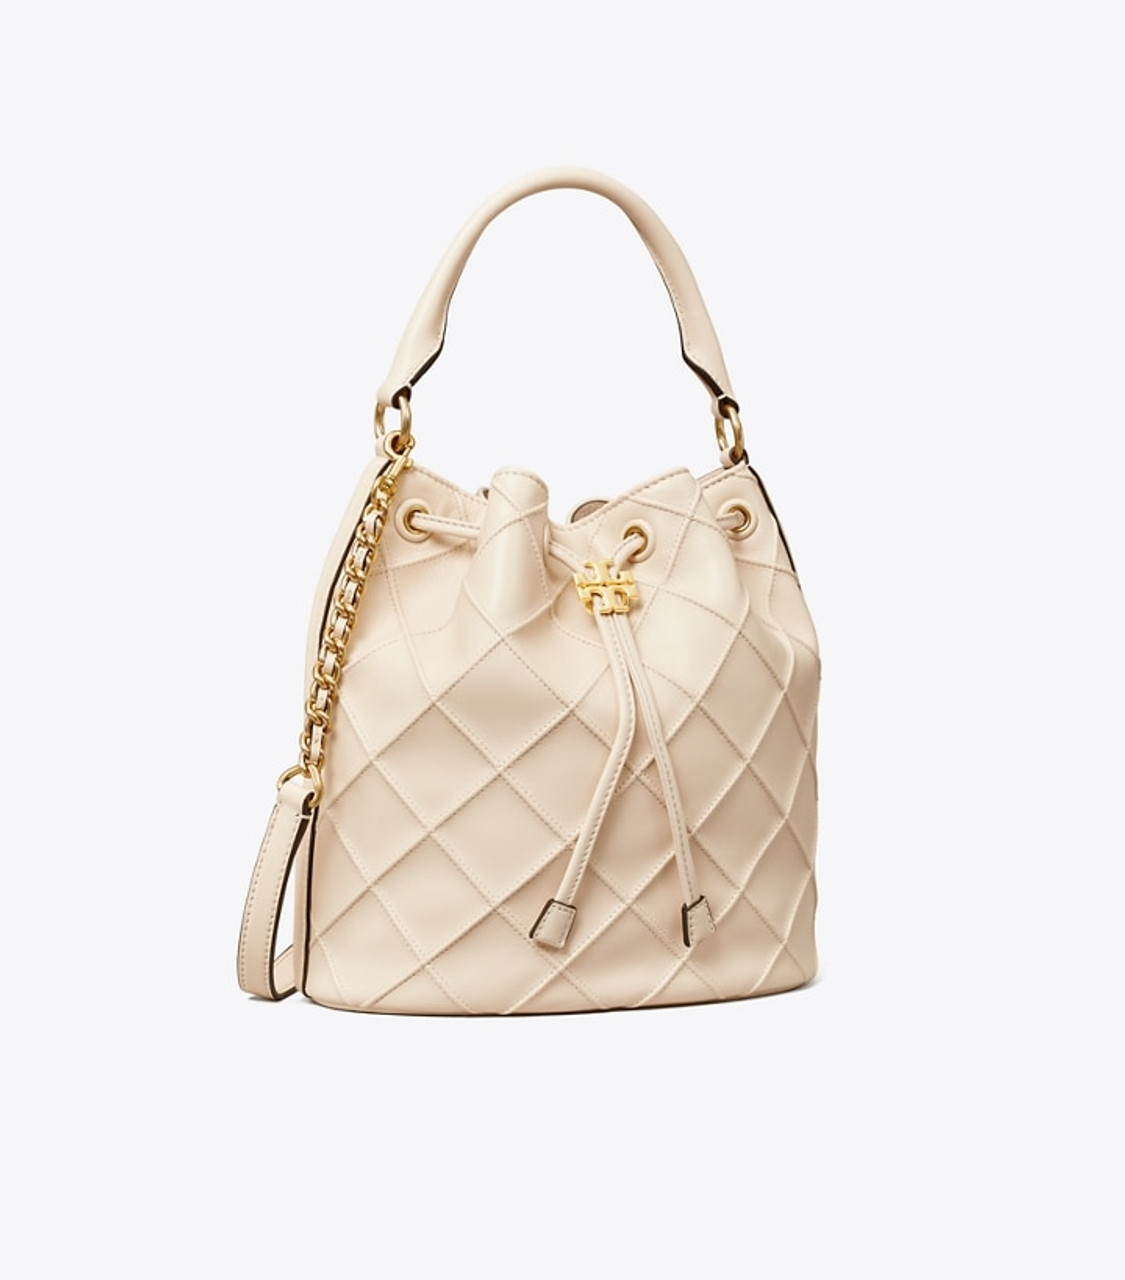 Tory Burch Large Fleming Soft Bucket Bag in Natural